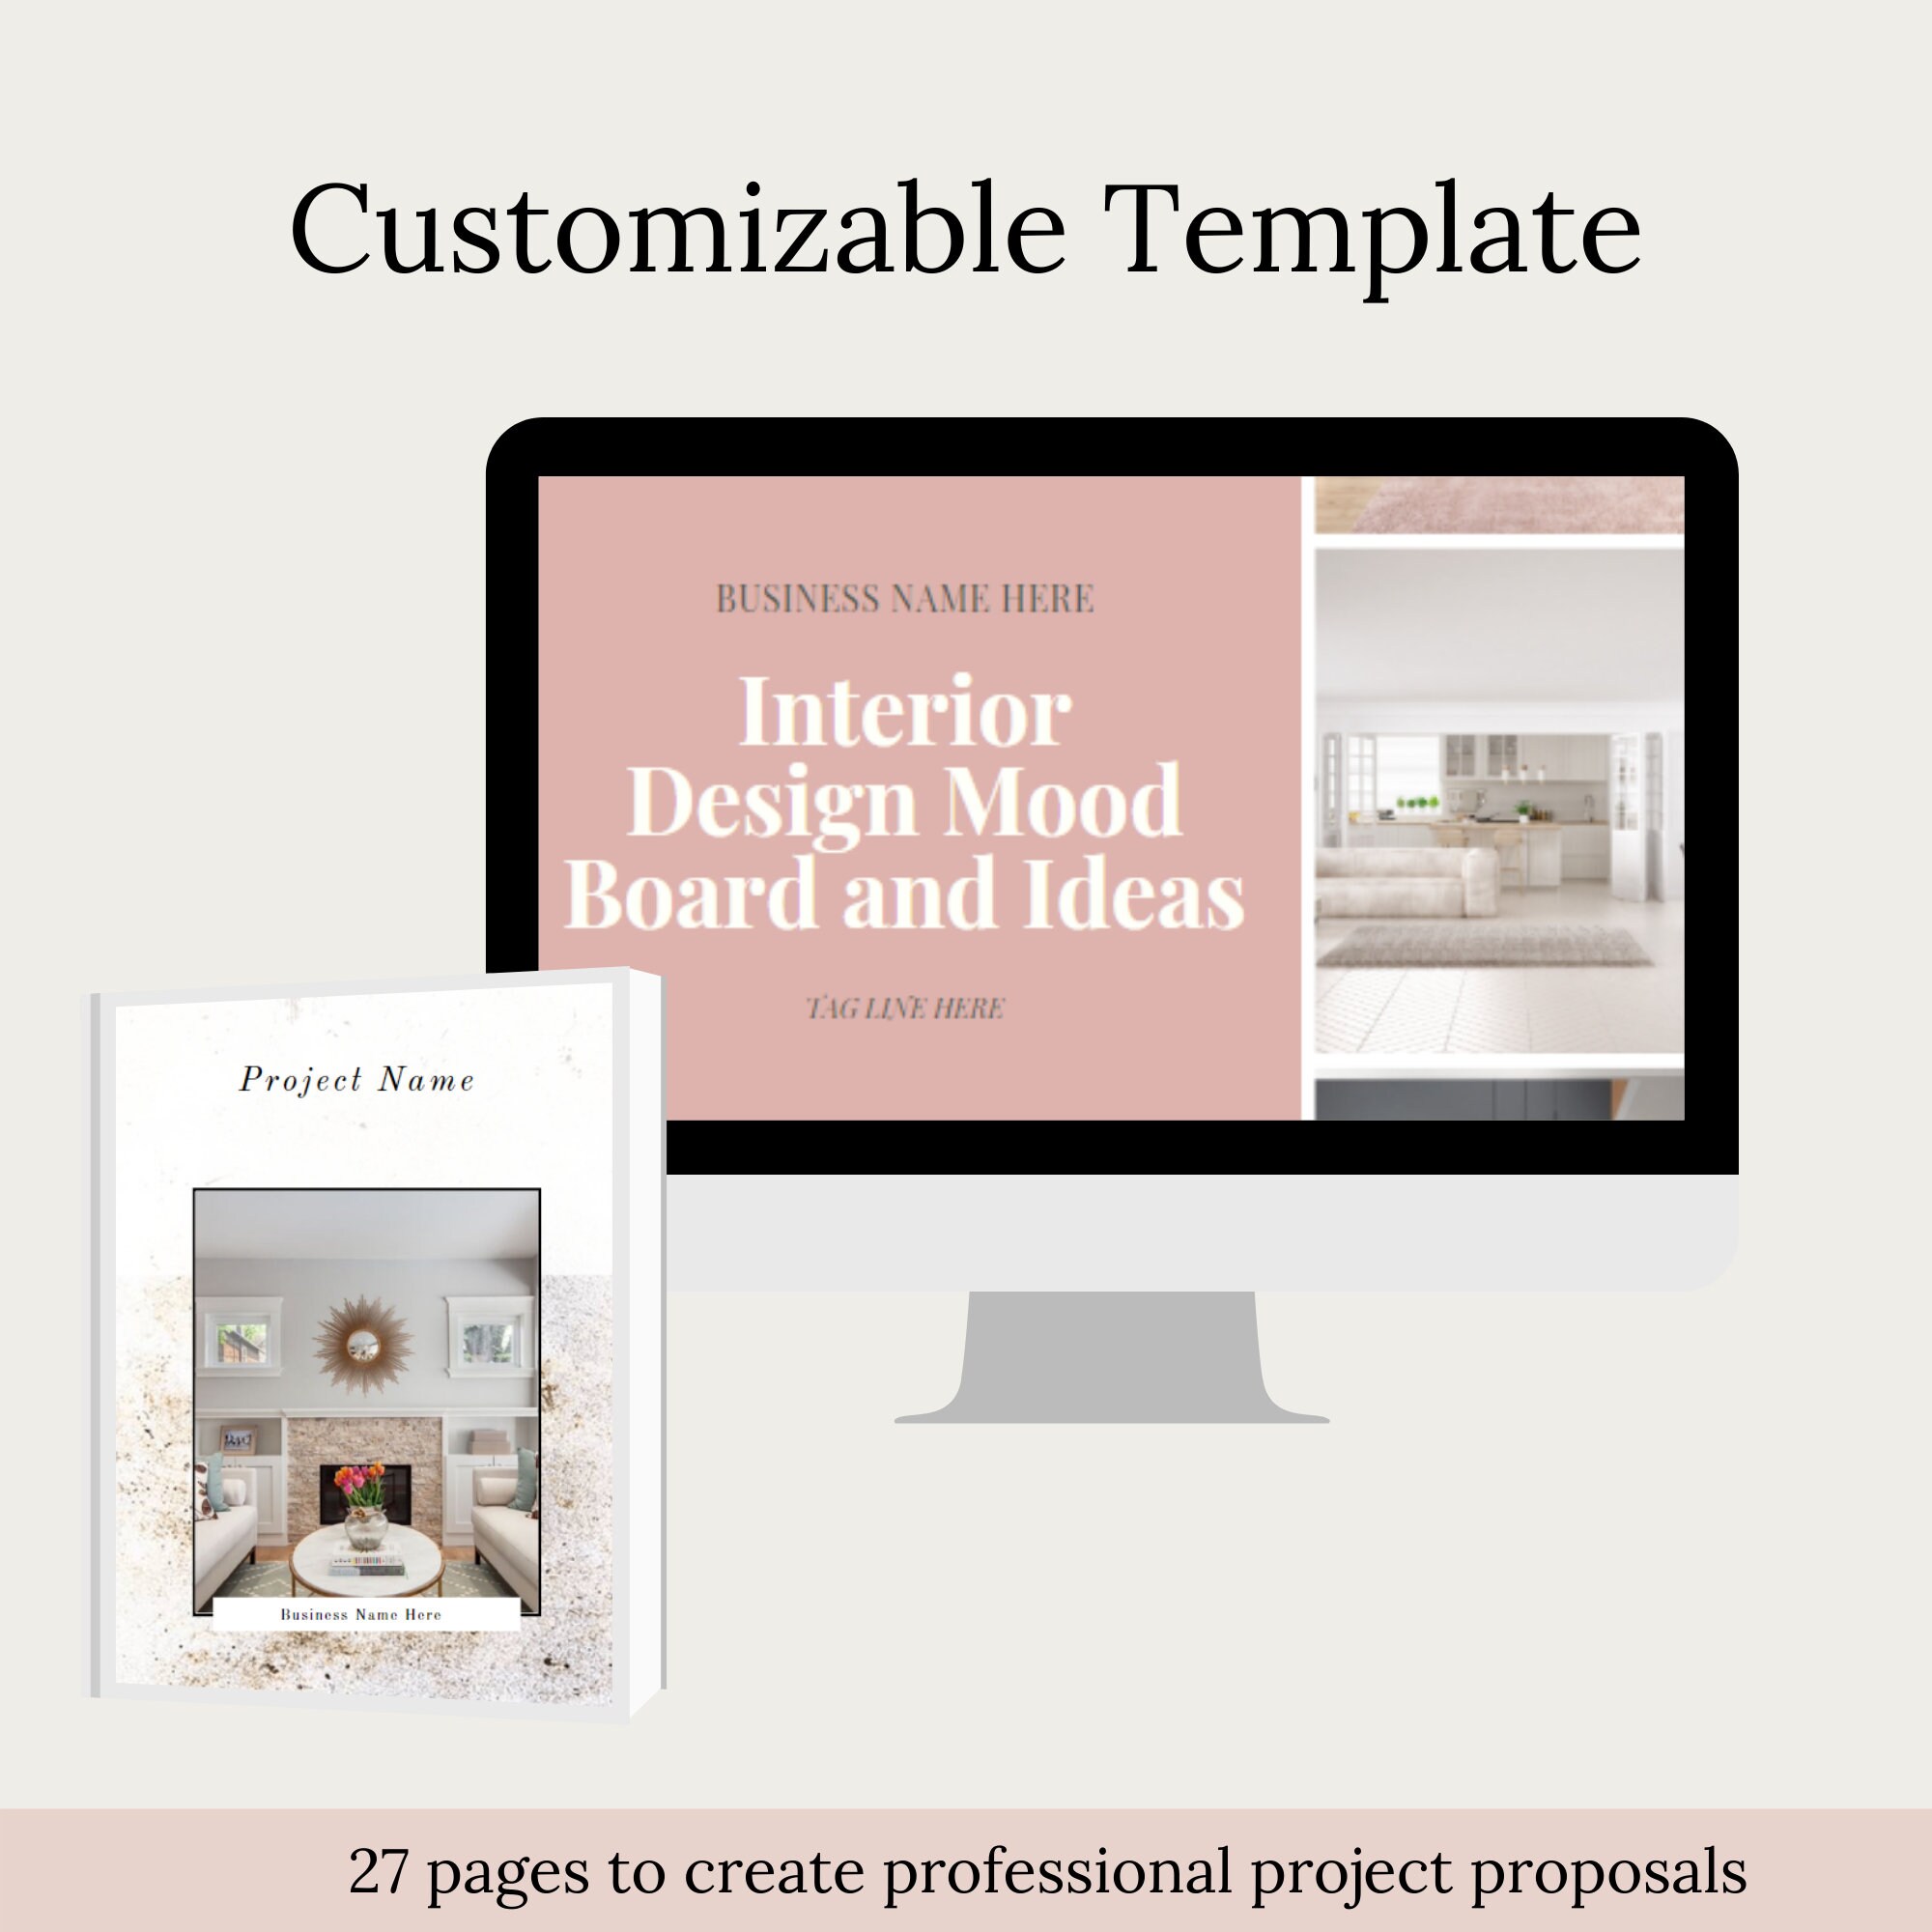 New Client Project Proposal Canva Template - Etsy